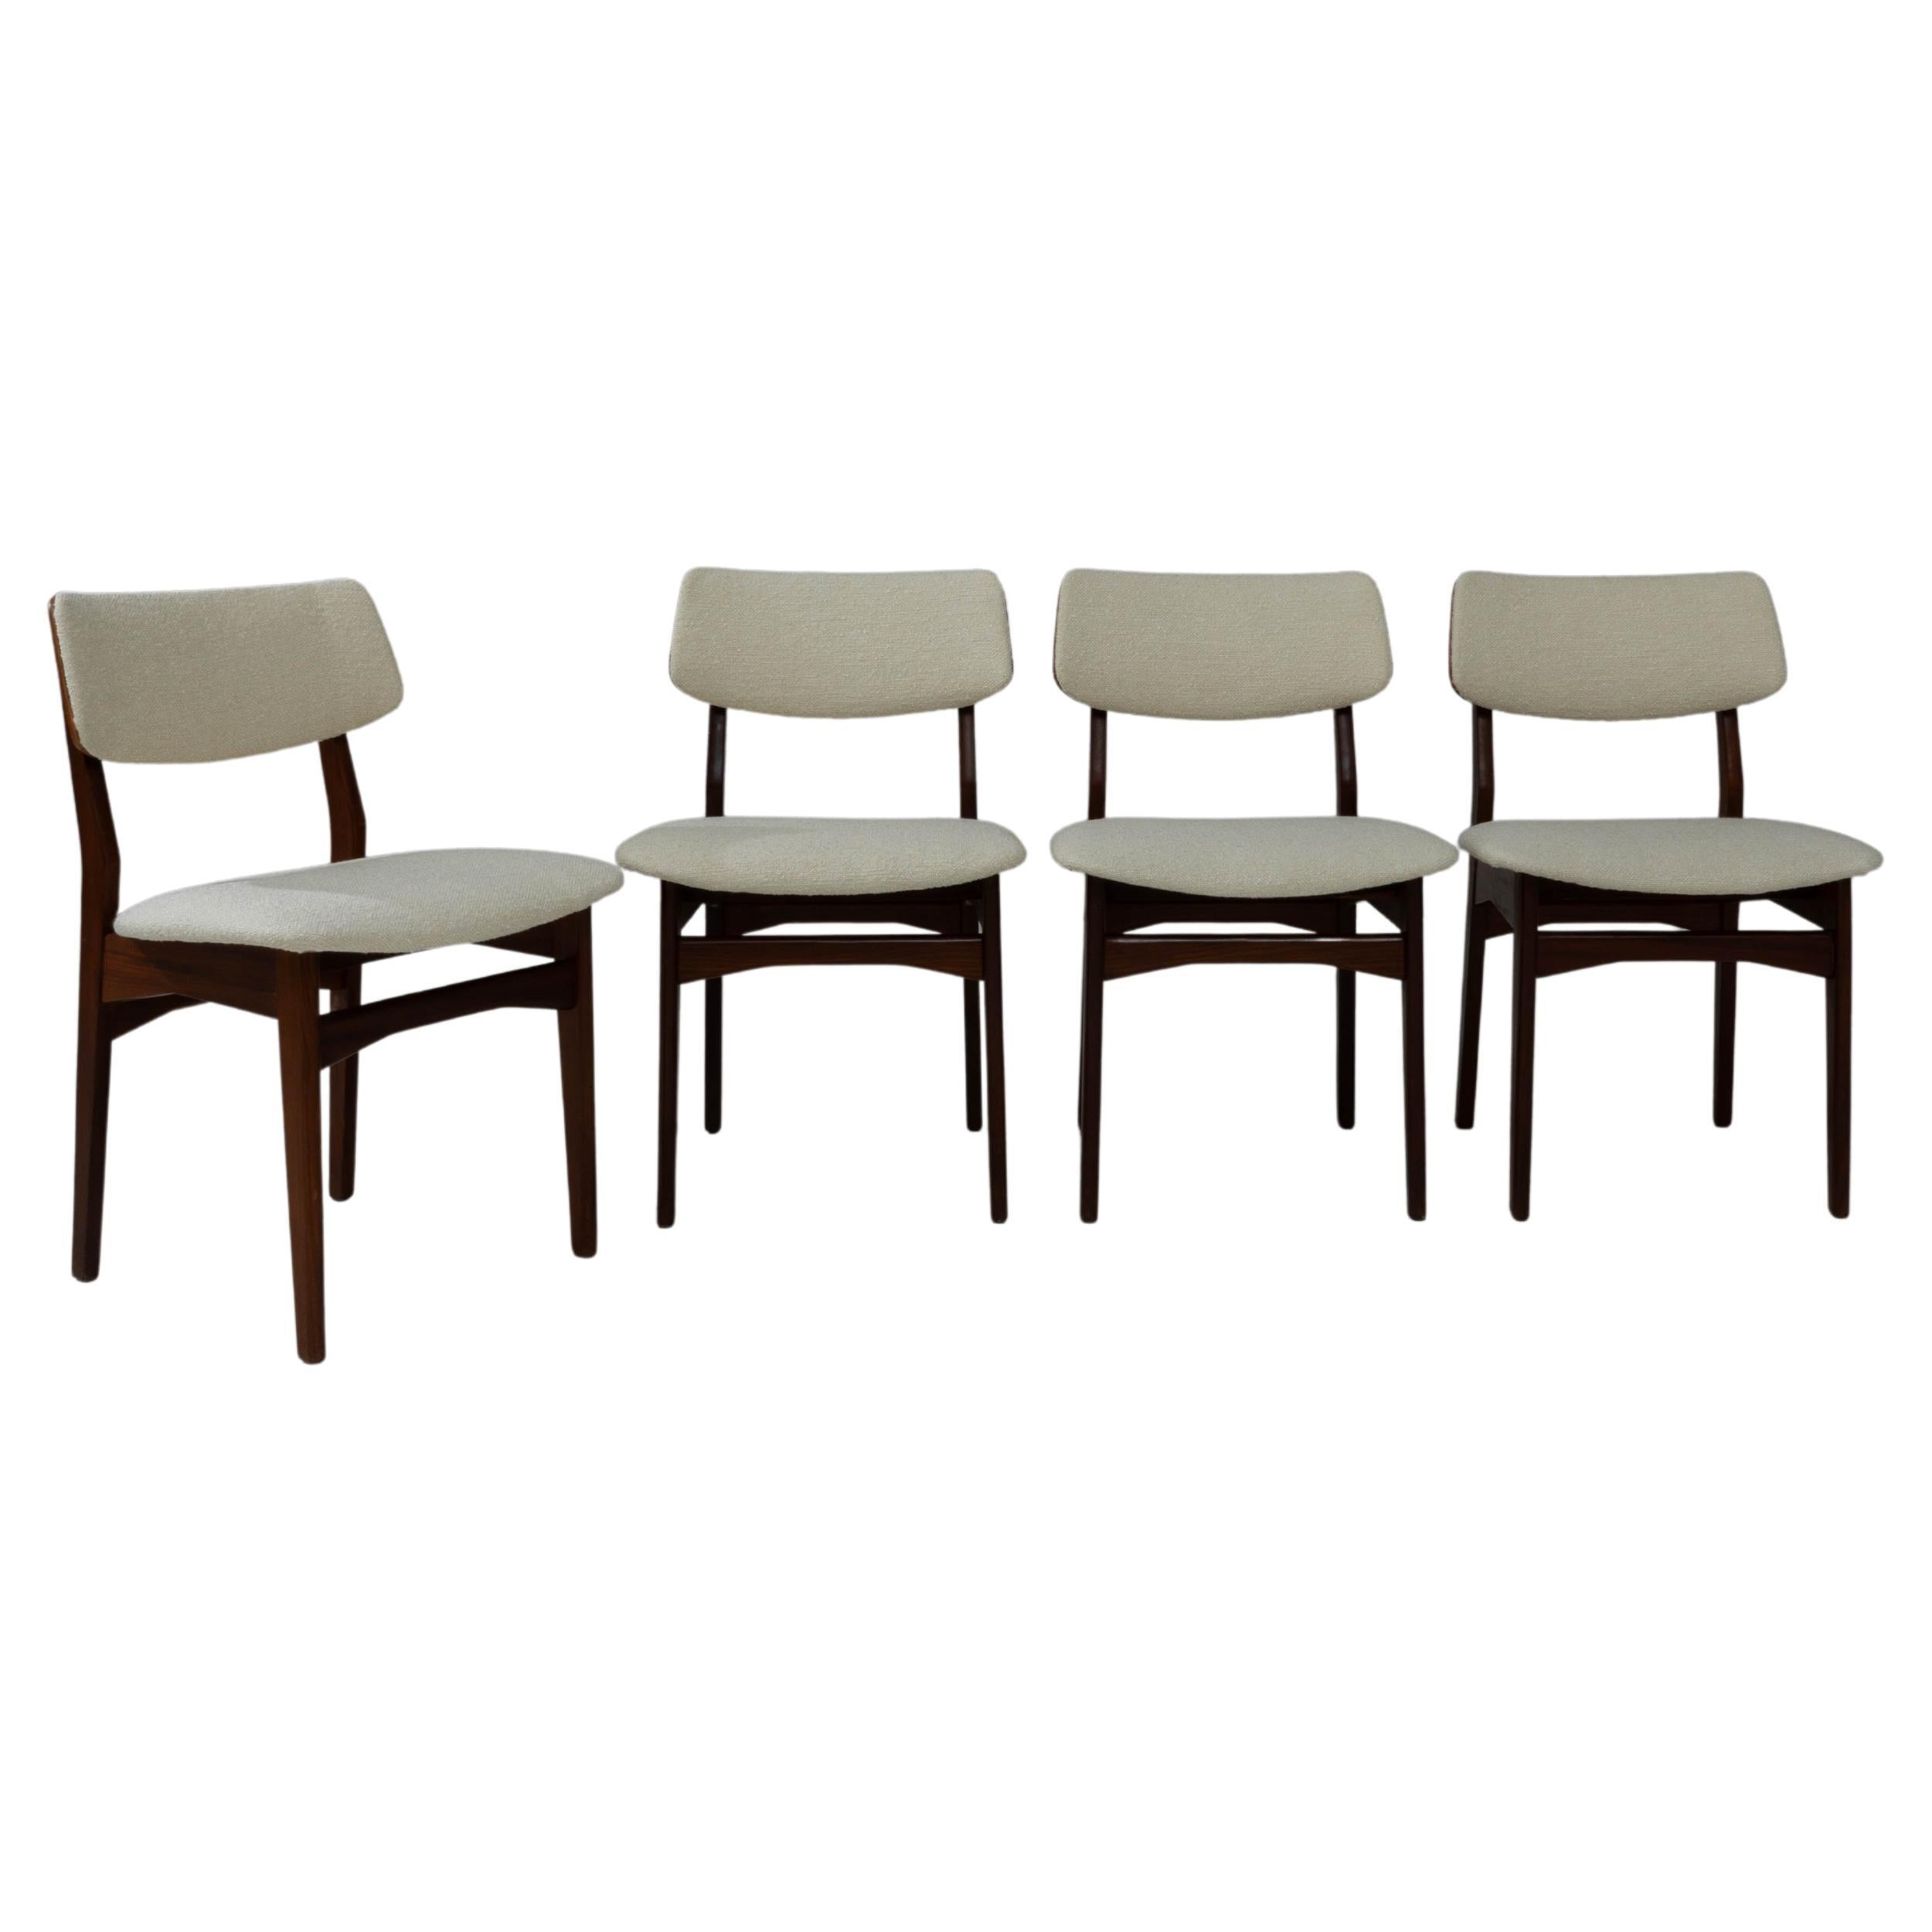 20th Century Scandinavian Upholstered Dining Chairs, Set of 4